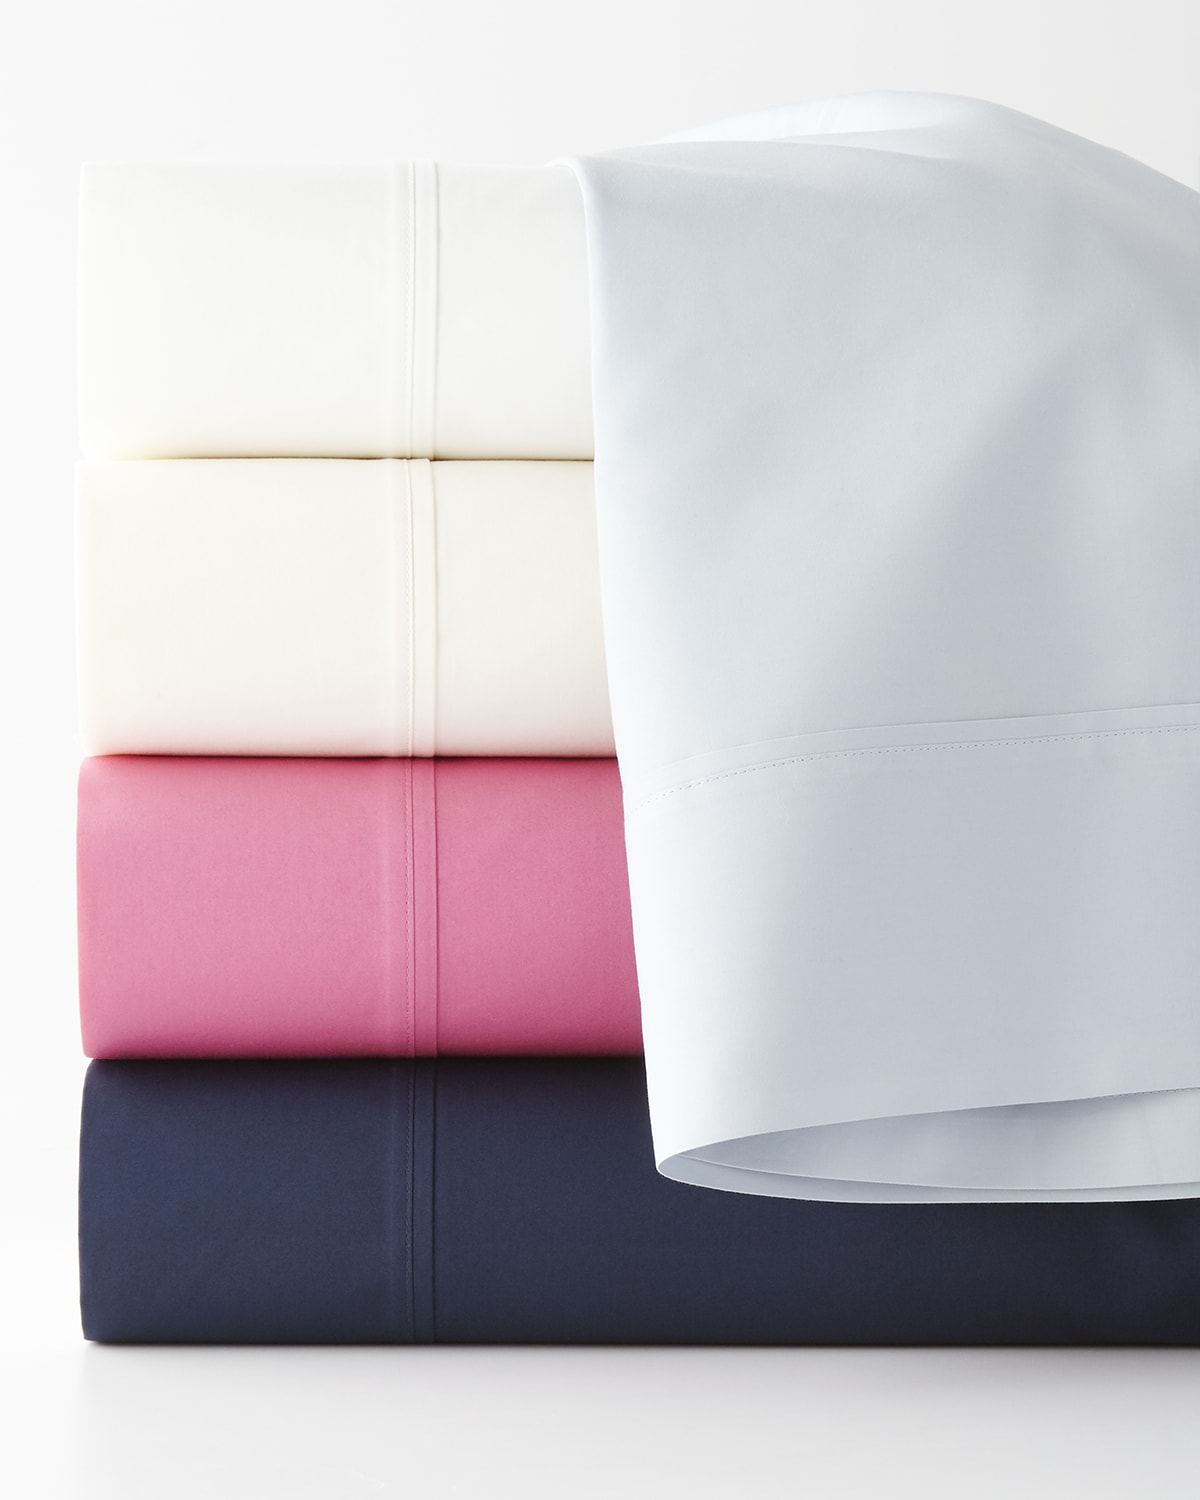 Image Ralph Lauren Home Two Standard 464 Thread Count Percale Pillowcases